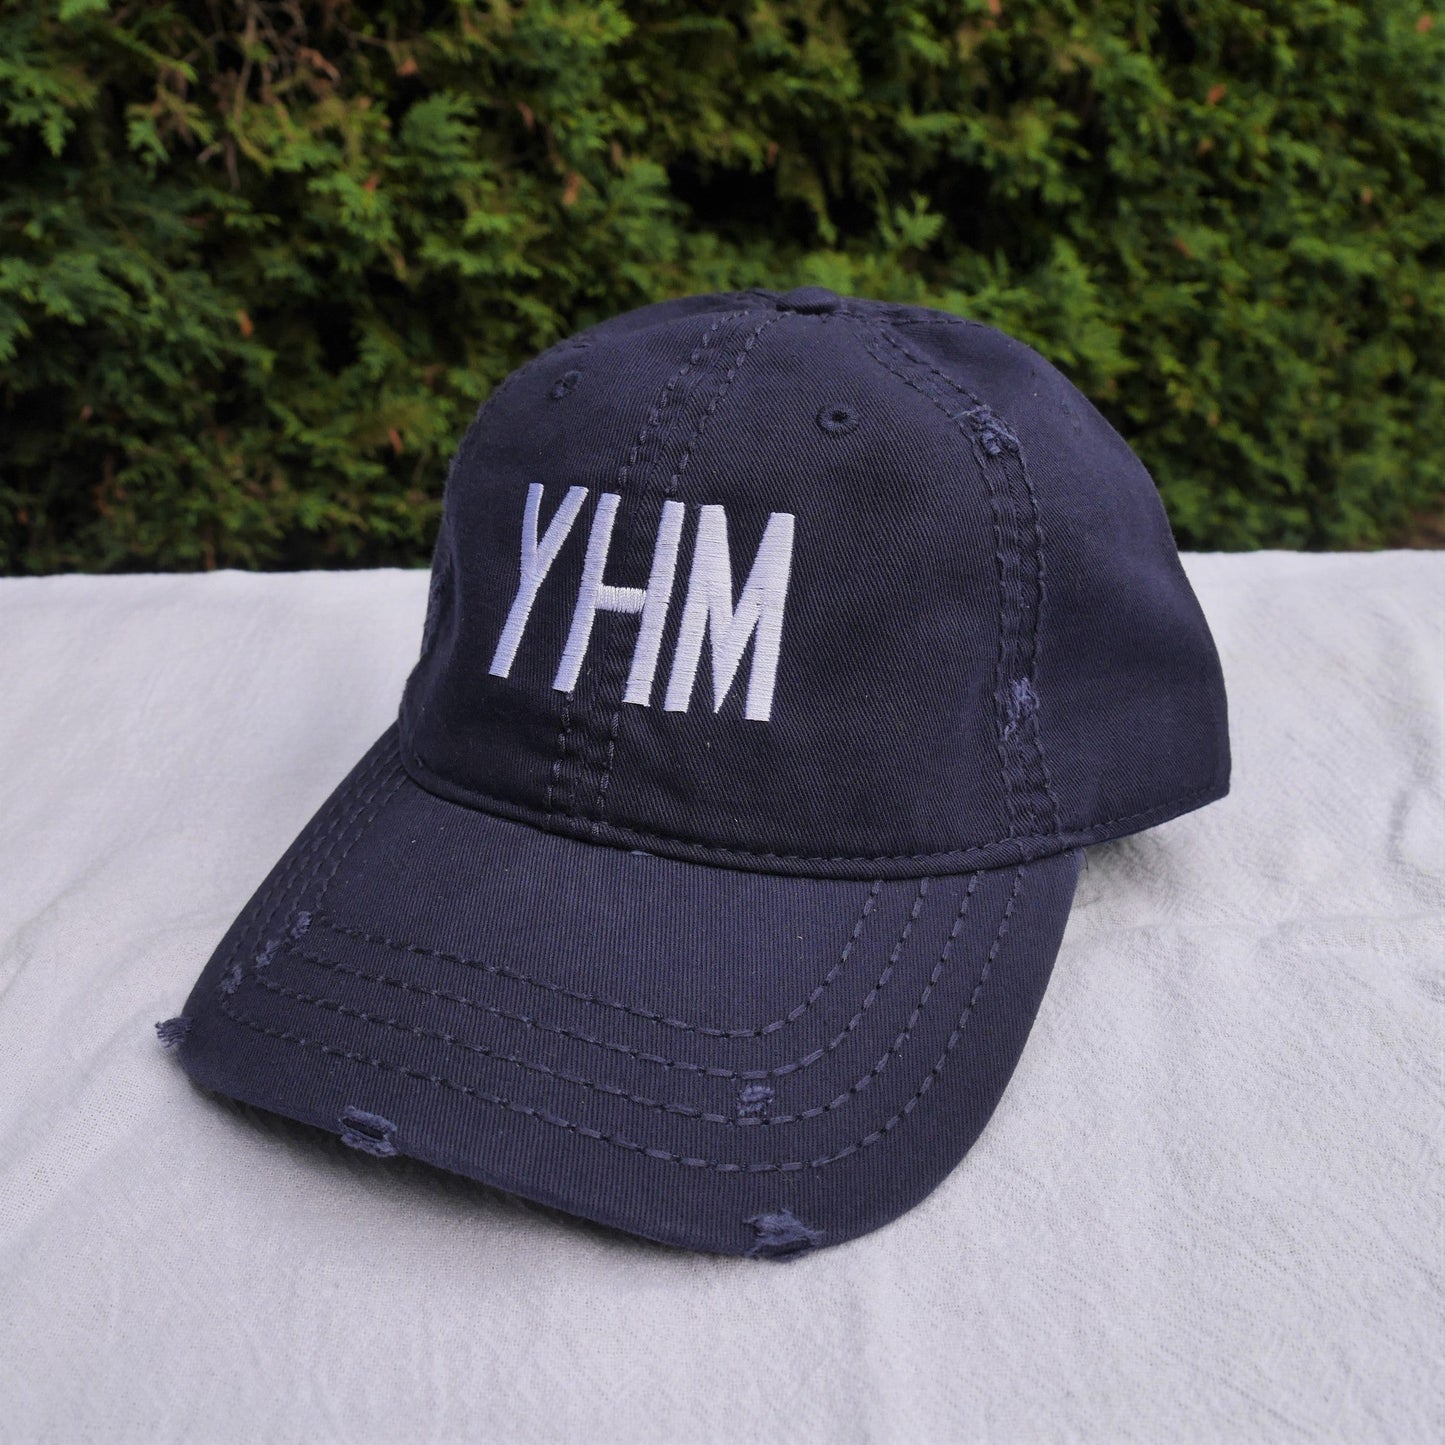 Airport Code Baseball Cap - White • YQY Sydney • YHM Designs - Image 31